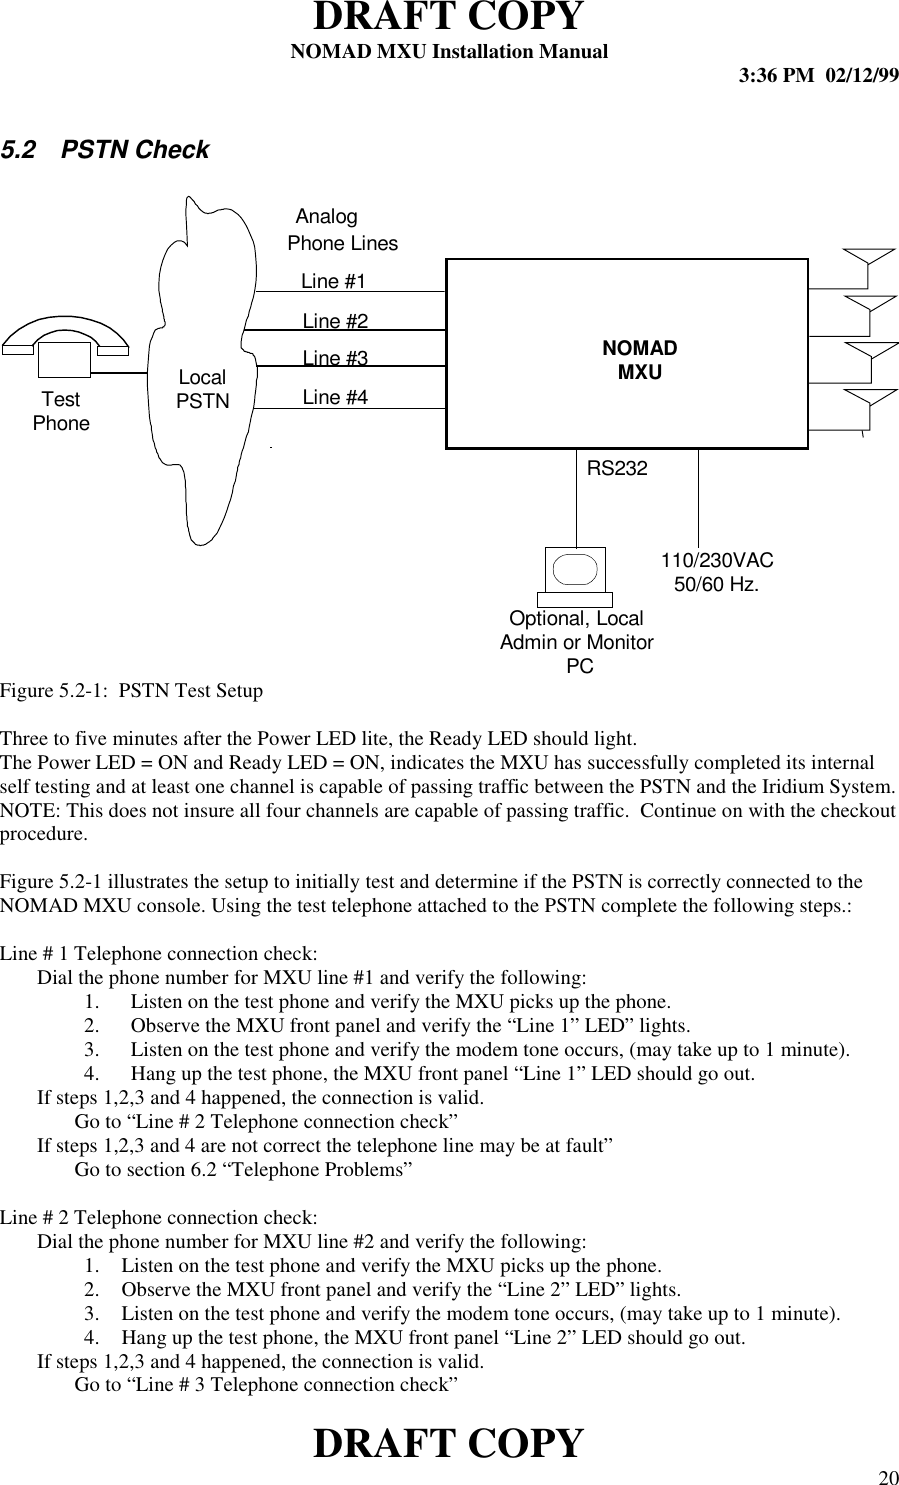 DRAFT COPYNOMAD MXU Installation Manual 3:36 PM  02/12/99DRAFT COPY 205.2 PSTN CheckFigure 5.2-1:  PSTN Test SetupThree to five minutes after the Power LED lite, the Ready LED should light.The Power LED = ON and Ready LED = ON, indicates the MXU has successfully completed its internalself testing and at least one channel is capable of passing traffic between the PSTN and the Iridium System.NOTE: This does not insure all four channels are capable of passing traffic.  Continue on with the checkoutprocedure.Figure 5.2-1 illustrates the setup to initially test and determine if the PSTN is correctly connected to theNOMAD MXU console. Using the test telephone attached to the PSTN complete the following steps.:  Line # 1 Telephone connection check: Dial the phone number for MXU line #1 and verify the following:1. Listen on the test phone and verify the MXU picks up the phone.2. Observe the MXU front panel and verify the “Line 1” LED” lights.3. Listen on the test phone and verify the modem tone occurs, (may take up to 1 minute).4. Hang up the test phone, the MXU front panel “Line 1” LED should go out.If steps 1,2,3 and 4 happened, the connection is valid.Go to “Line # 2 Telephone connection check” If steps 1,2,3 and 4 are not correct the telephone line may be at fault” Go to section 6.2 “Telephone Problems”  Line # 2 Telephone connection check: Dial the phone number for MXU line #2 and verify the following:1. Listen on the test phone and verify the MXU picks up the phone.2. Observe the MXU front panel and verify the “Line 2” LED” lights.3. Listen on the test phone and verify the modem tone occurs, (may take up to 1 minute).4. Hang up the test phone, the MXU front panel “Line 2” LED should go out.If steps 1,2,3 and 4 happened, the connection is valid.Go to “Line # 3 Telephone connection check”RS232NOMADMXUAnalogPhone LinesLocalPSTN110/230VAC50/60 Hz.Optional, LocalAdmin or Monitor PCLine #1Line #2Line #4Line #3TestPhone